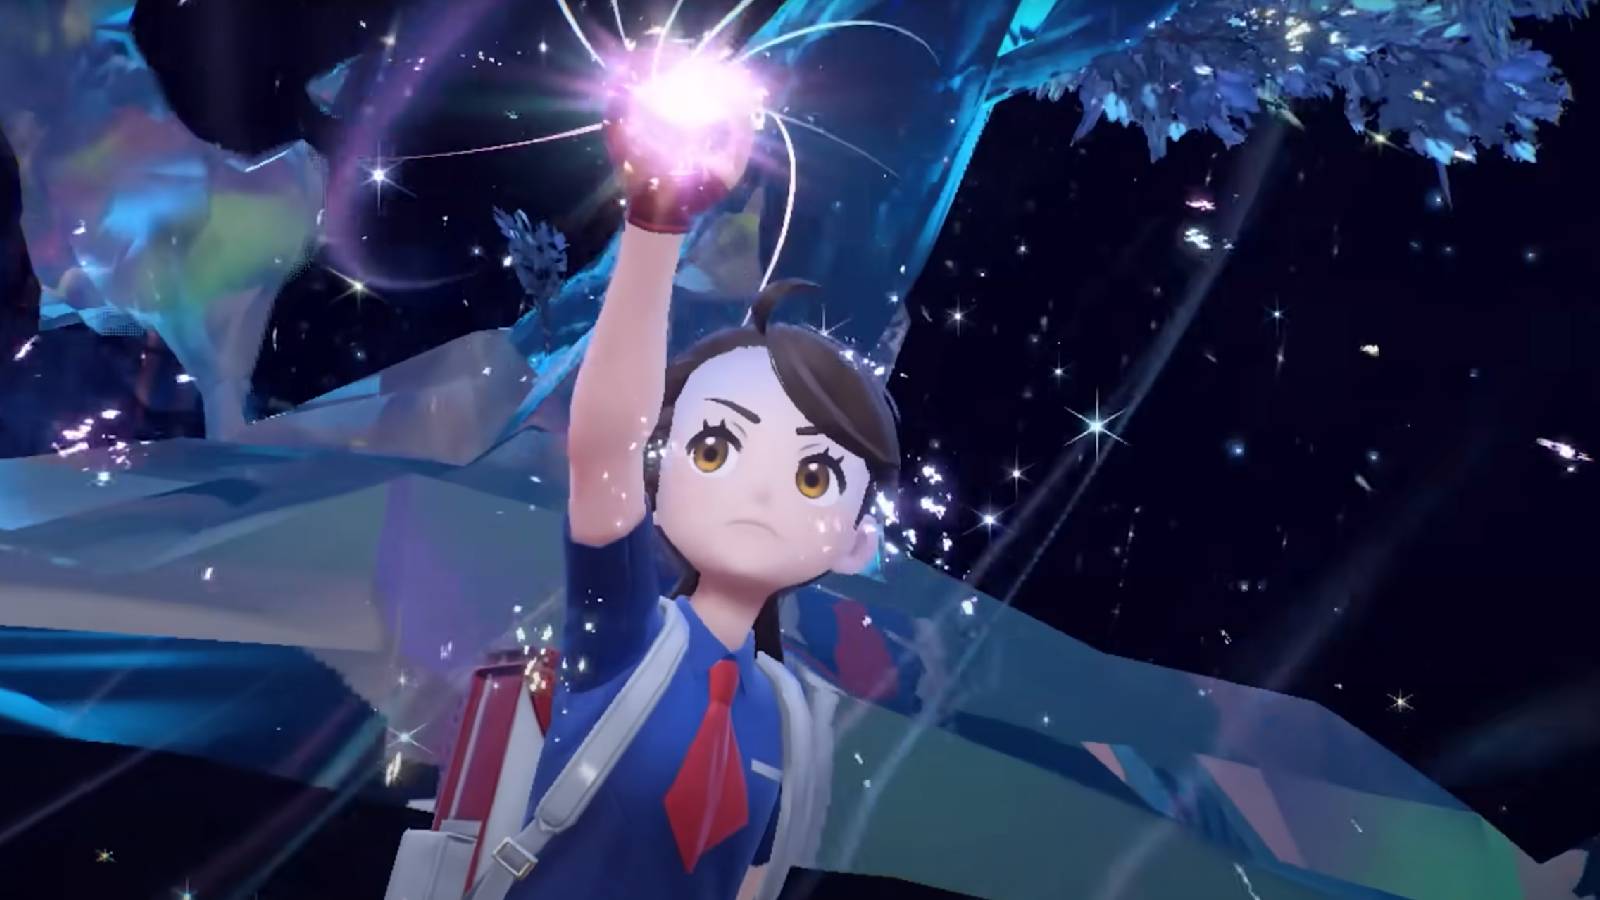 A Pokemon trainer holds a Pokeball aloft, with the ball overflowing with Tera energy